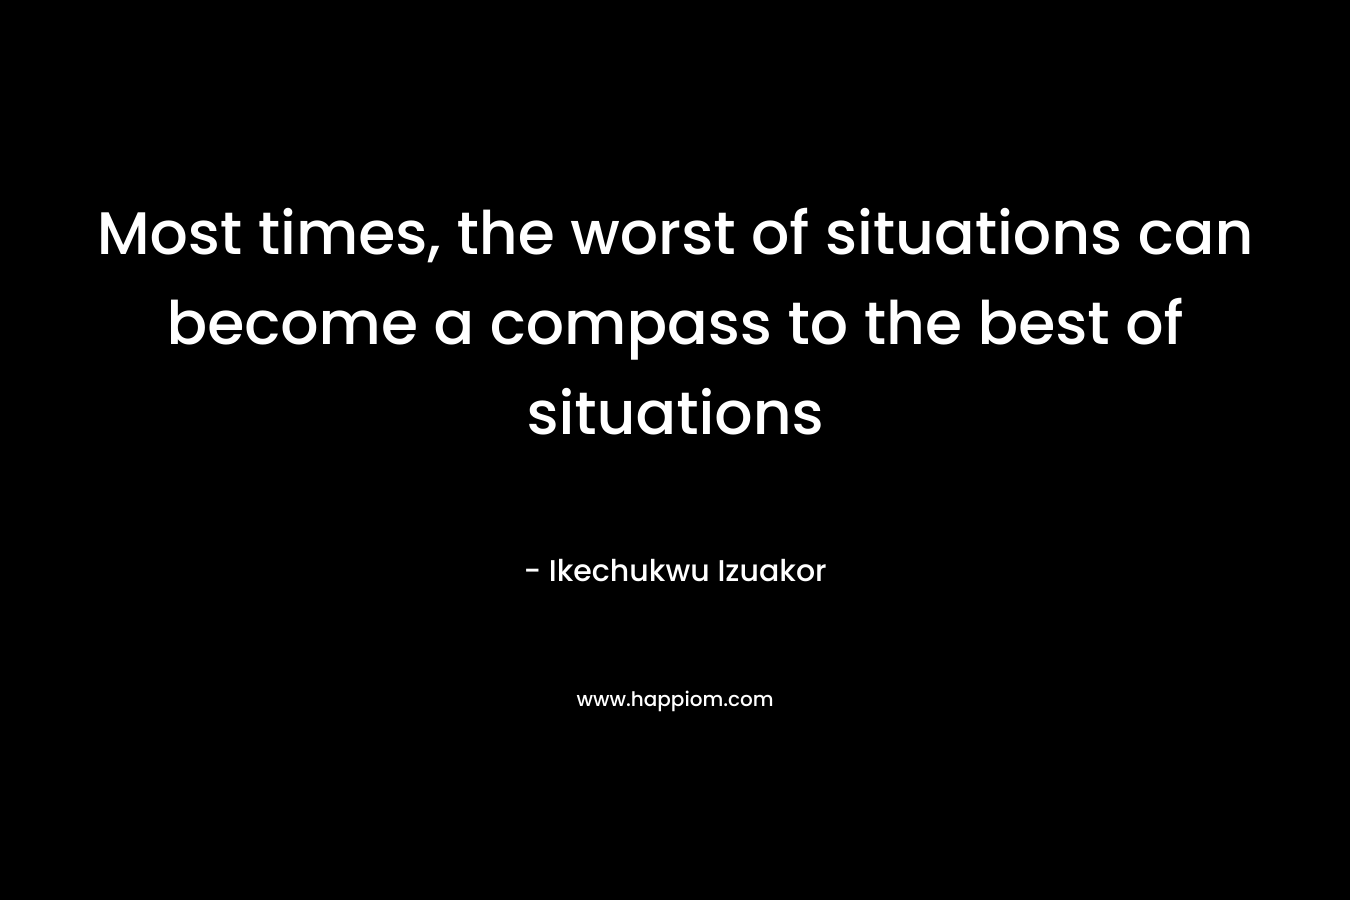 Most times, the worst of situations can become a compass to the best of situations